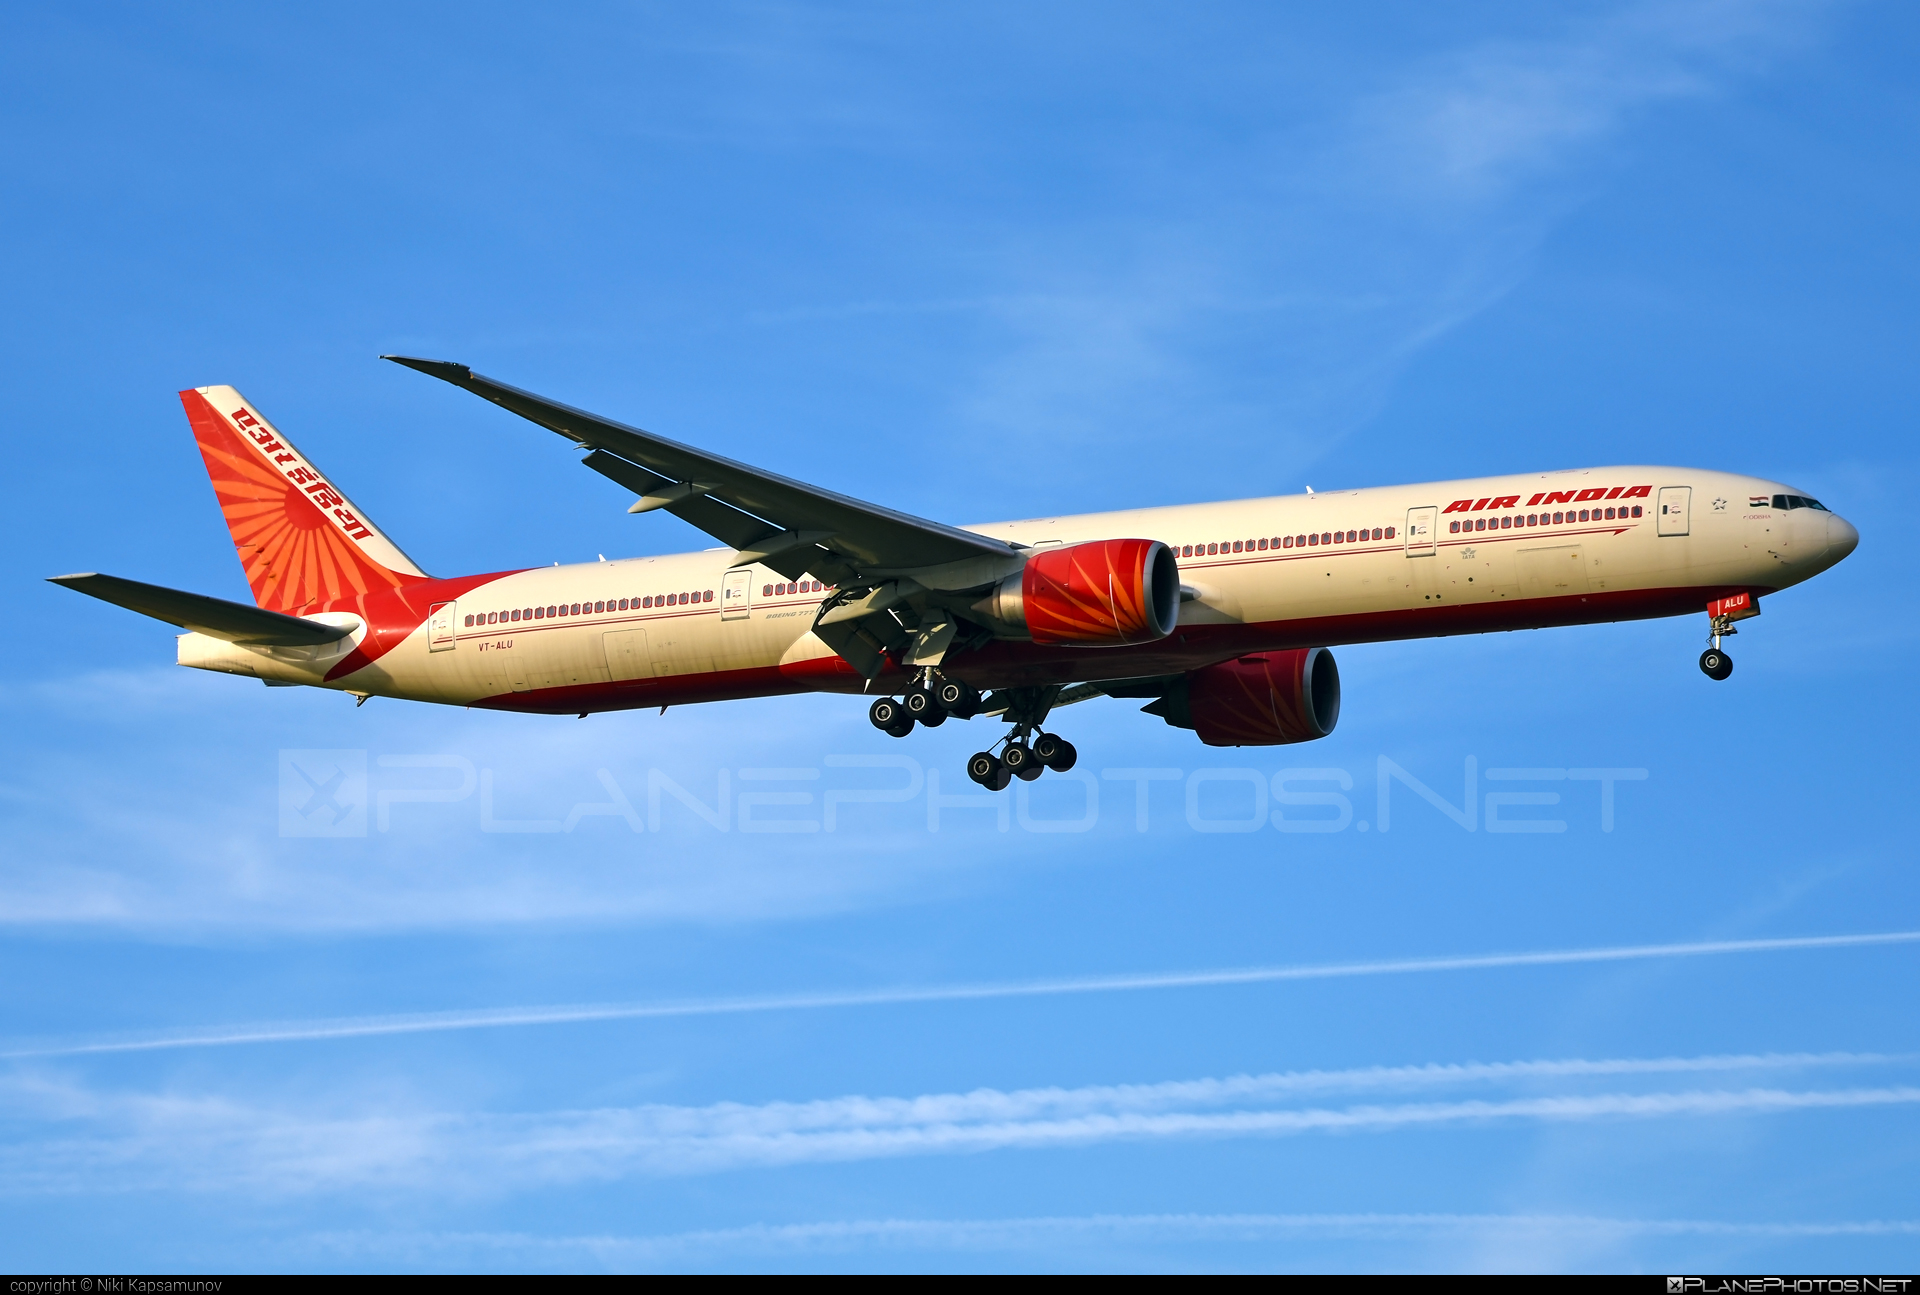 Boeing 777-300ER - VT-ALU operated by Air India #airindia #b777 #b777er #boeing #boeing777 #tripleseven